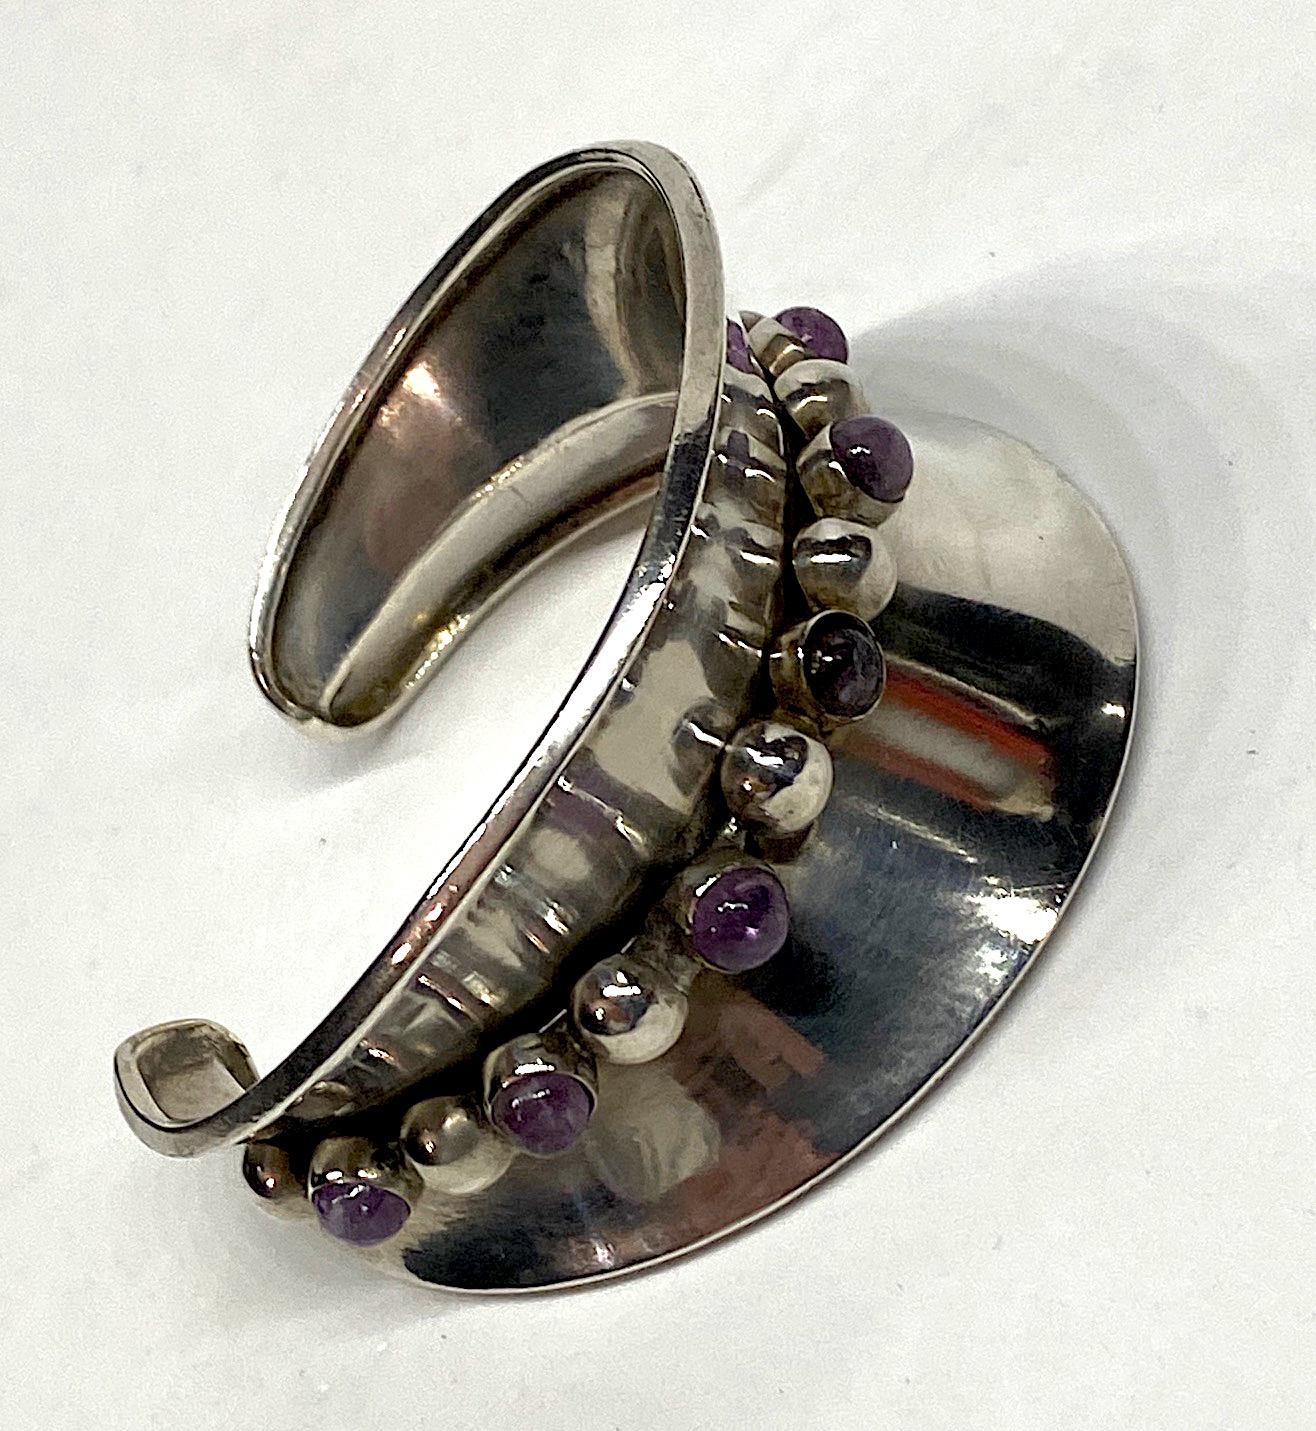 Taxco Mexico 1950s Modernist Sterling and Amethyst Cuff Bracelet 6